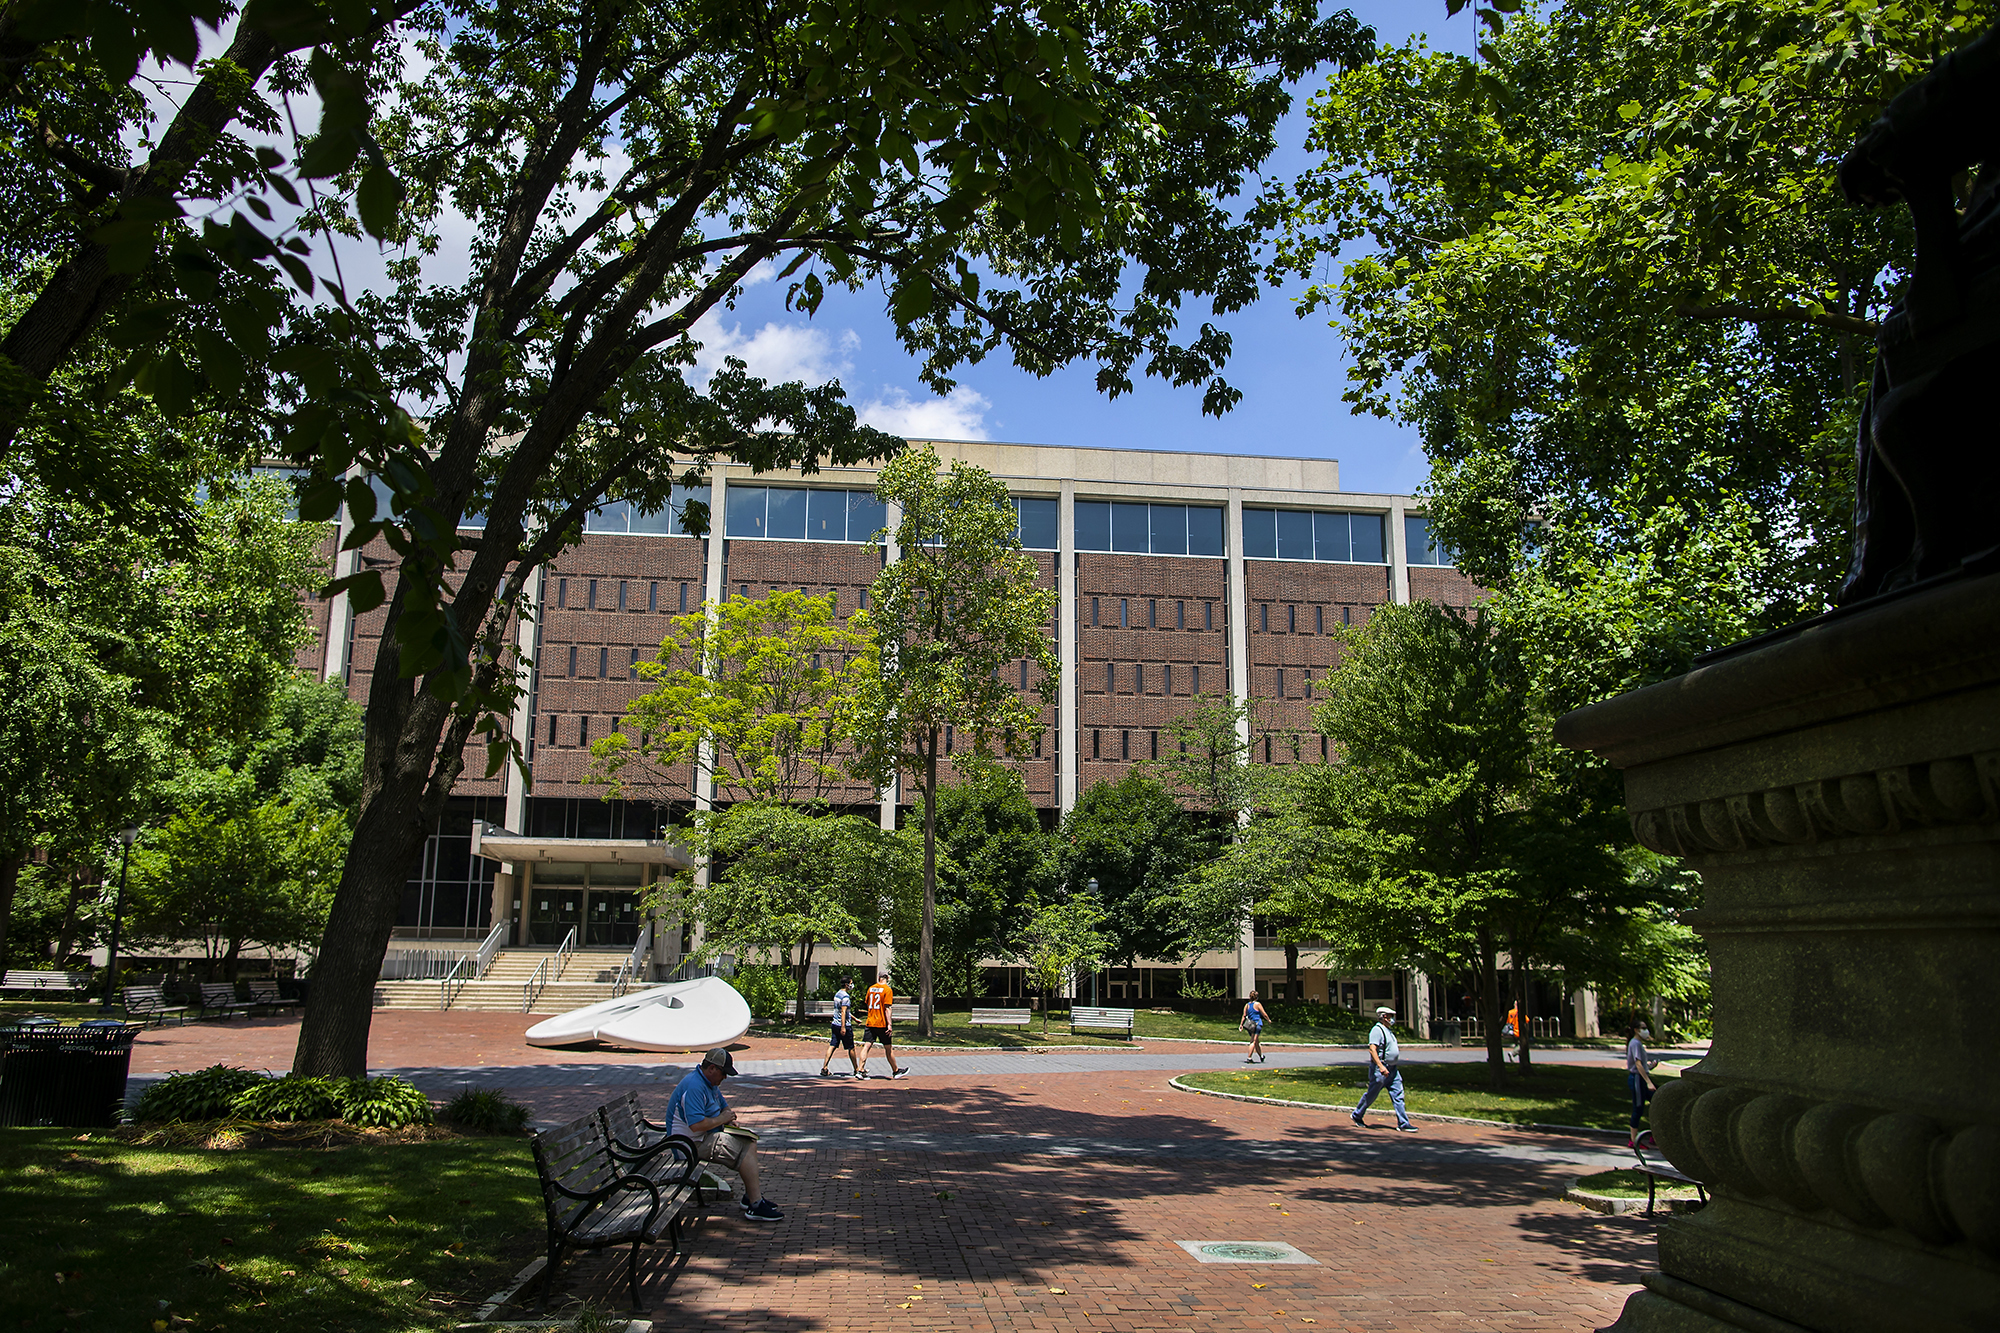 Outside picture of Penn campus with people walking and sitting on a bench